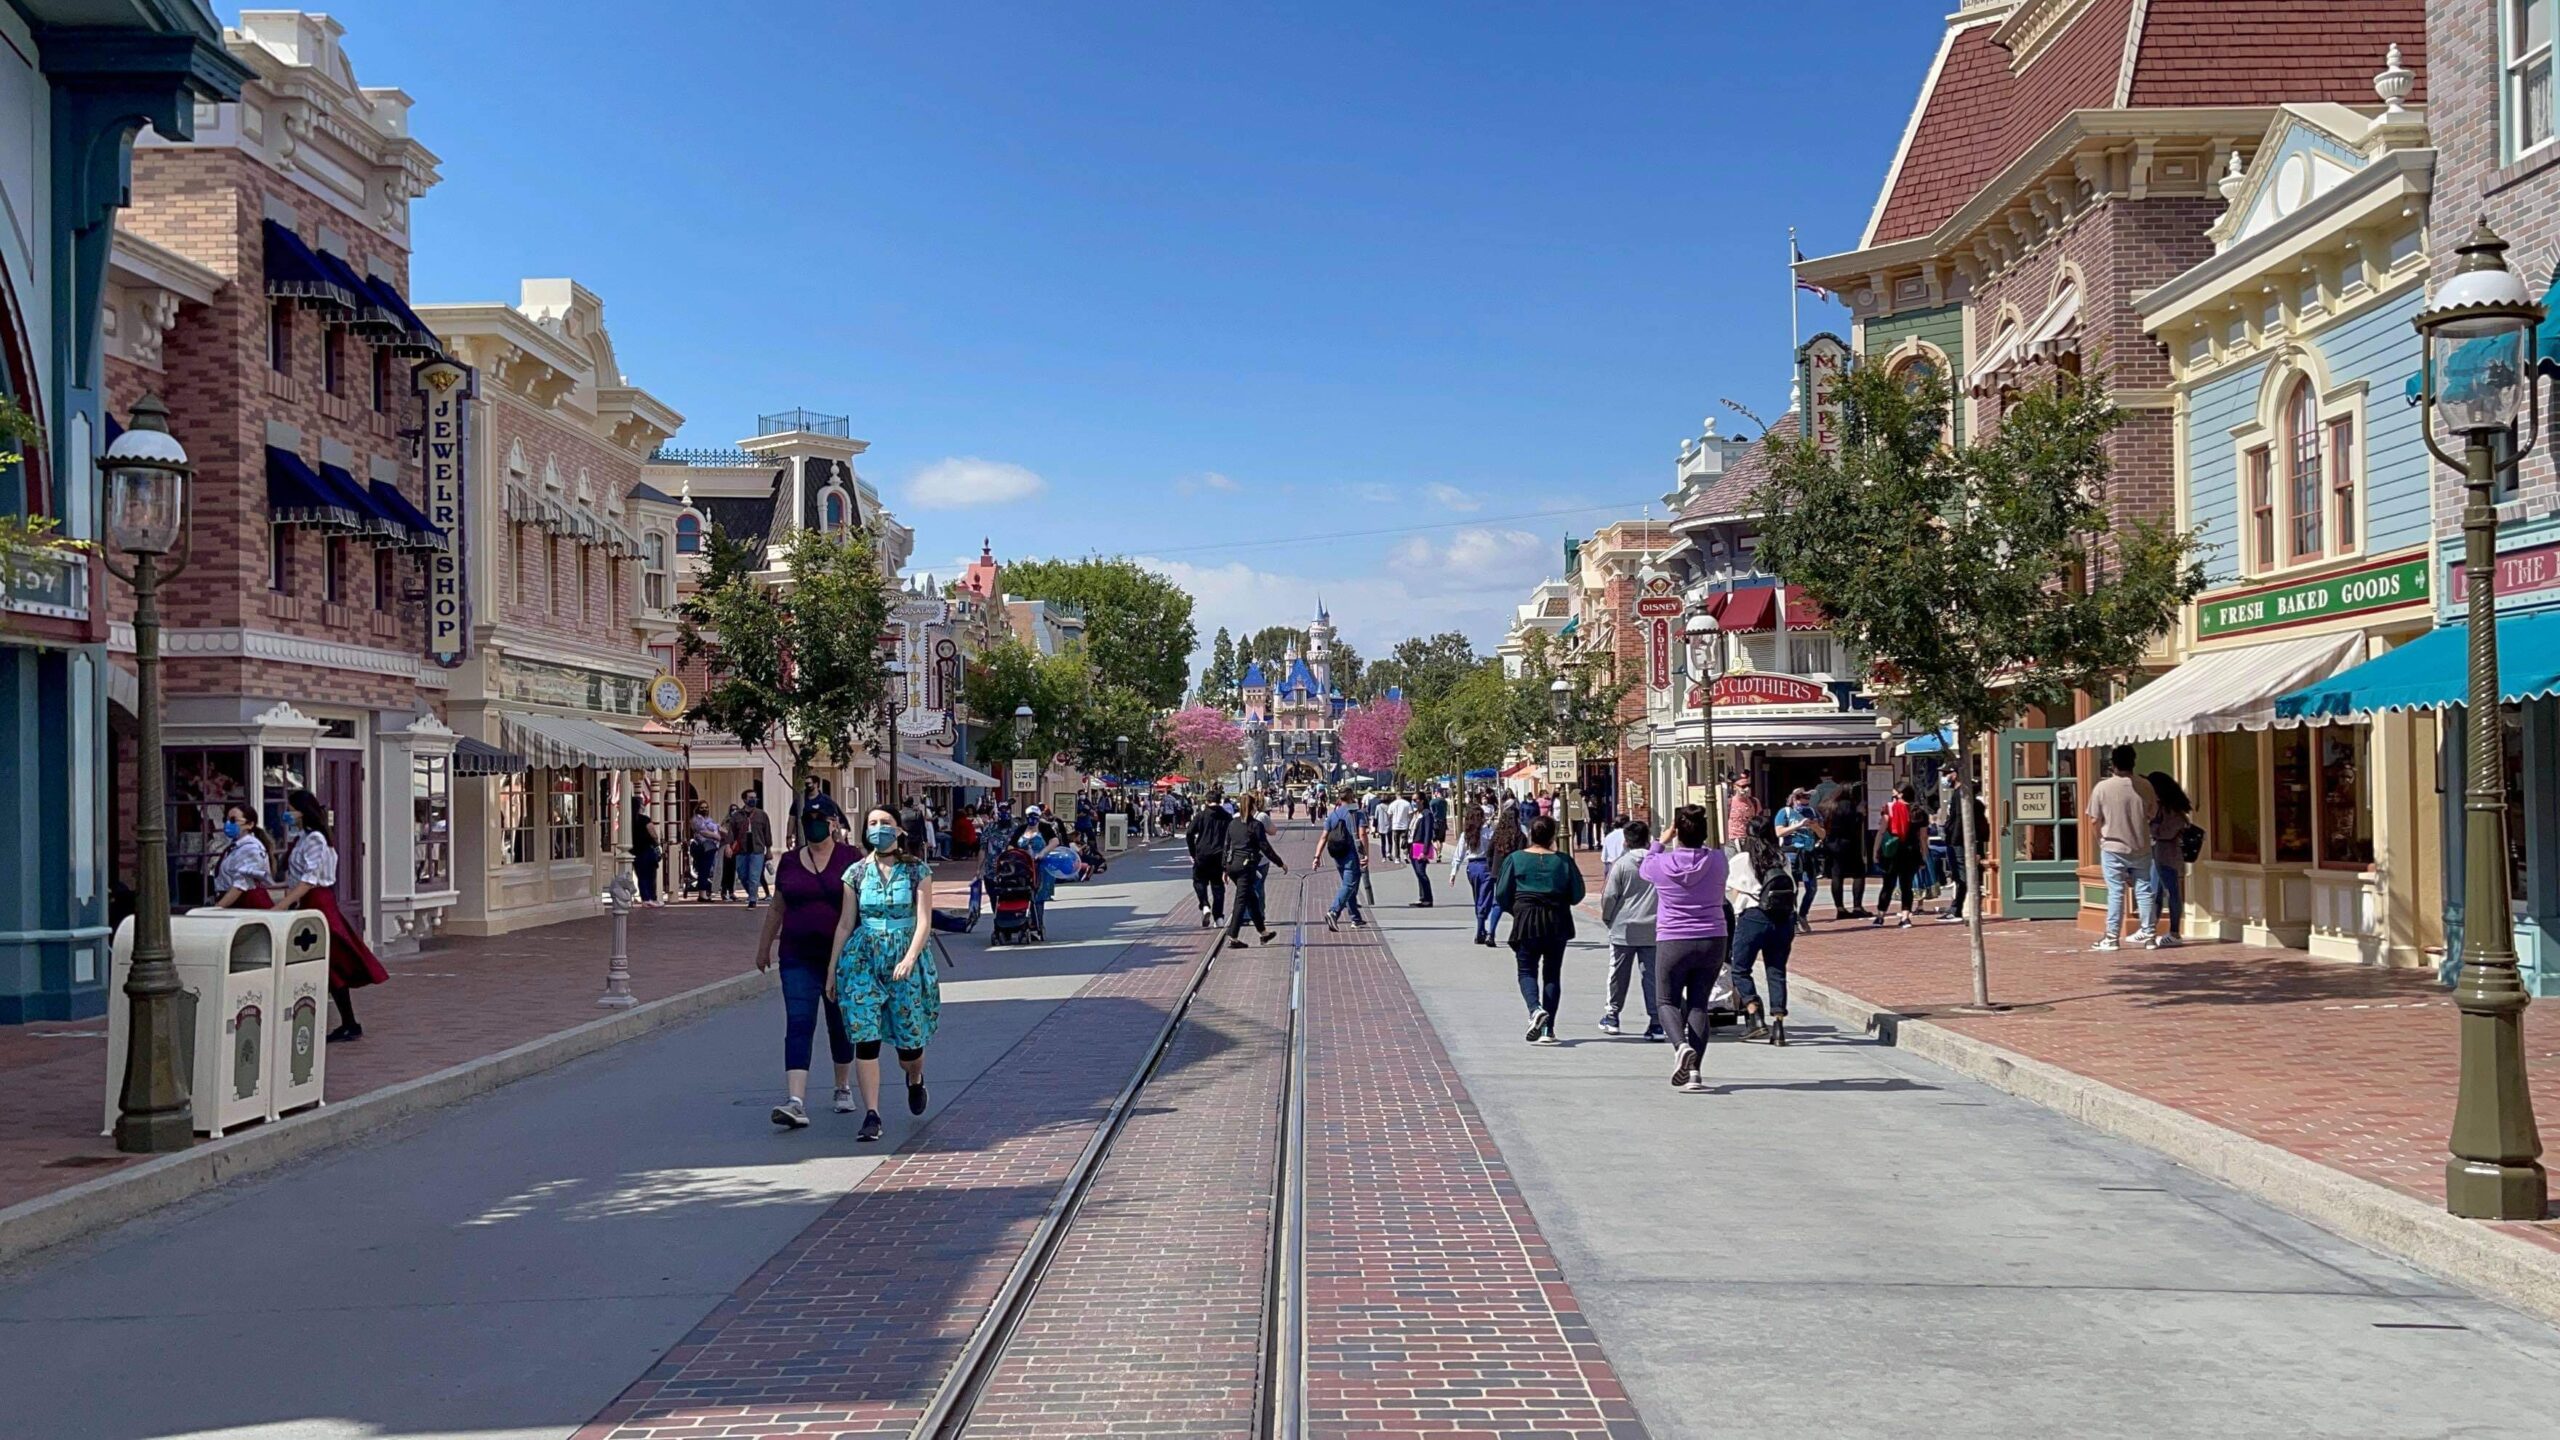 First look at a newly Reopened Disneyland